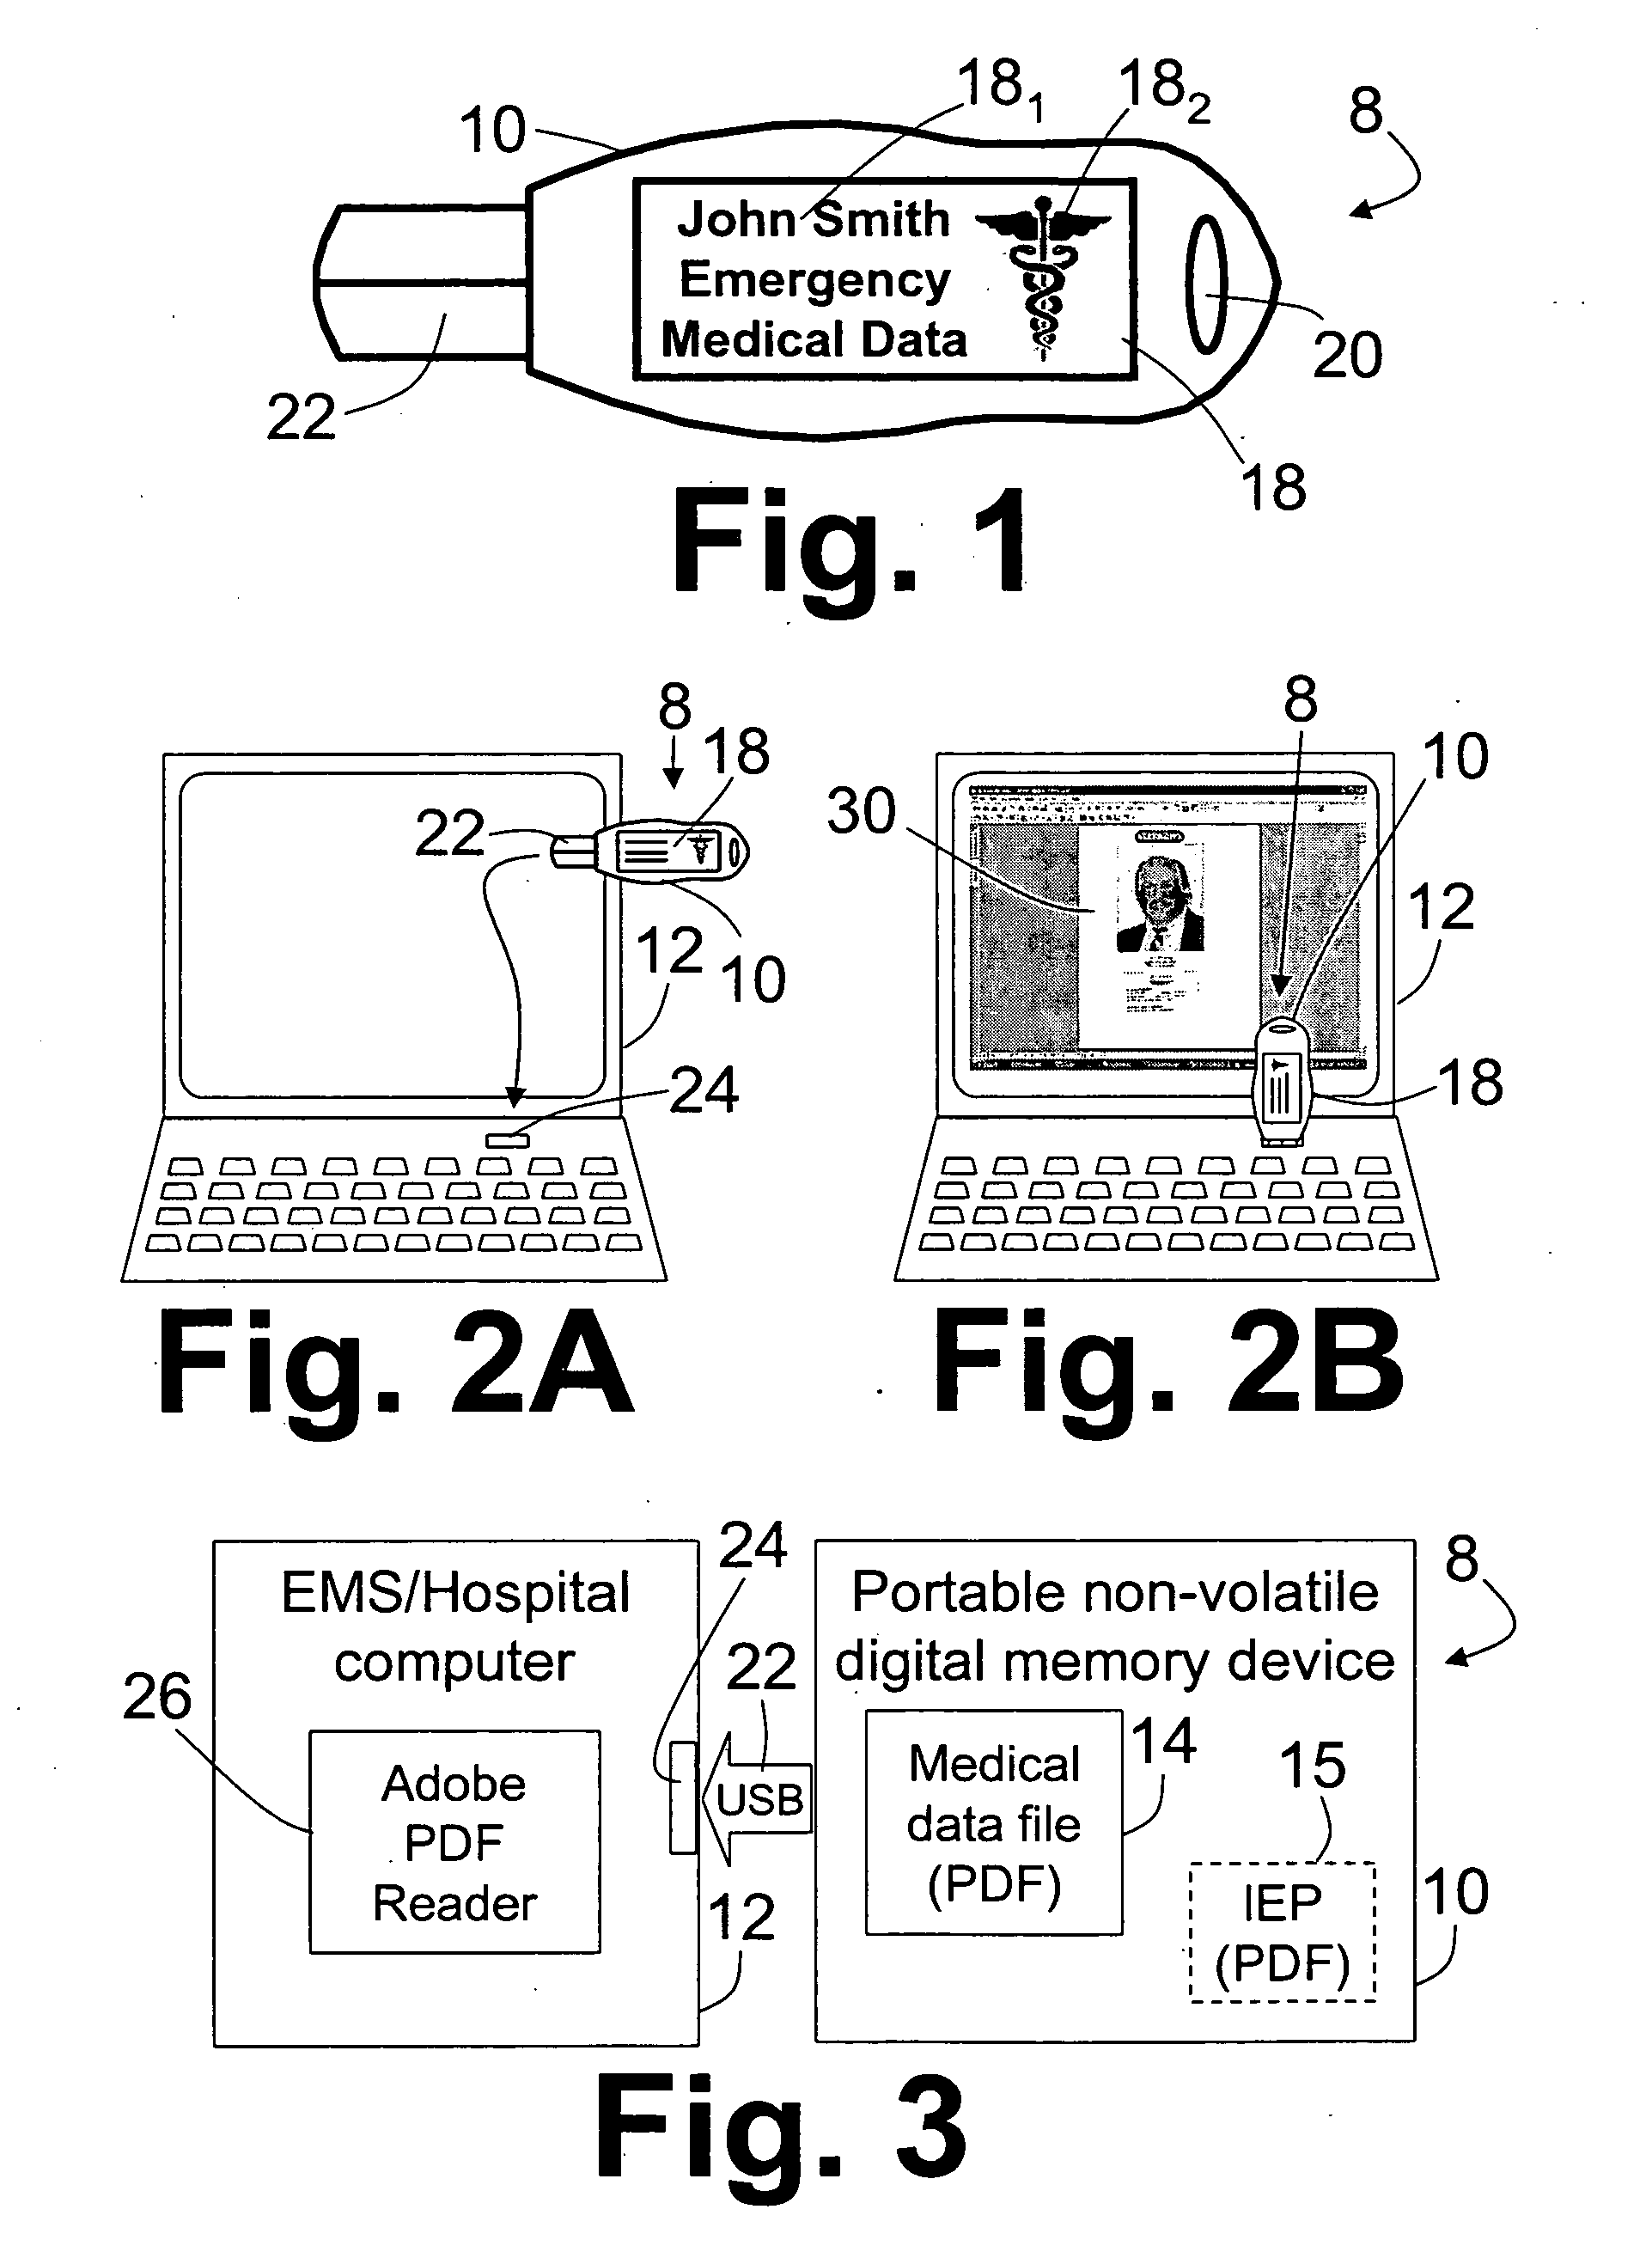 Portable method and device for personal medical record compilation and retrieval